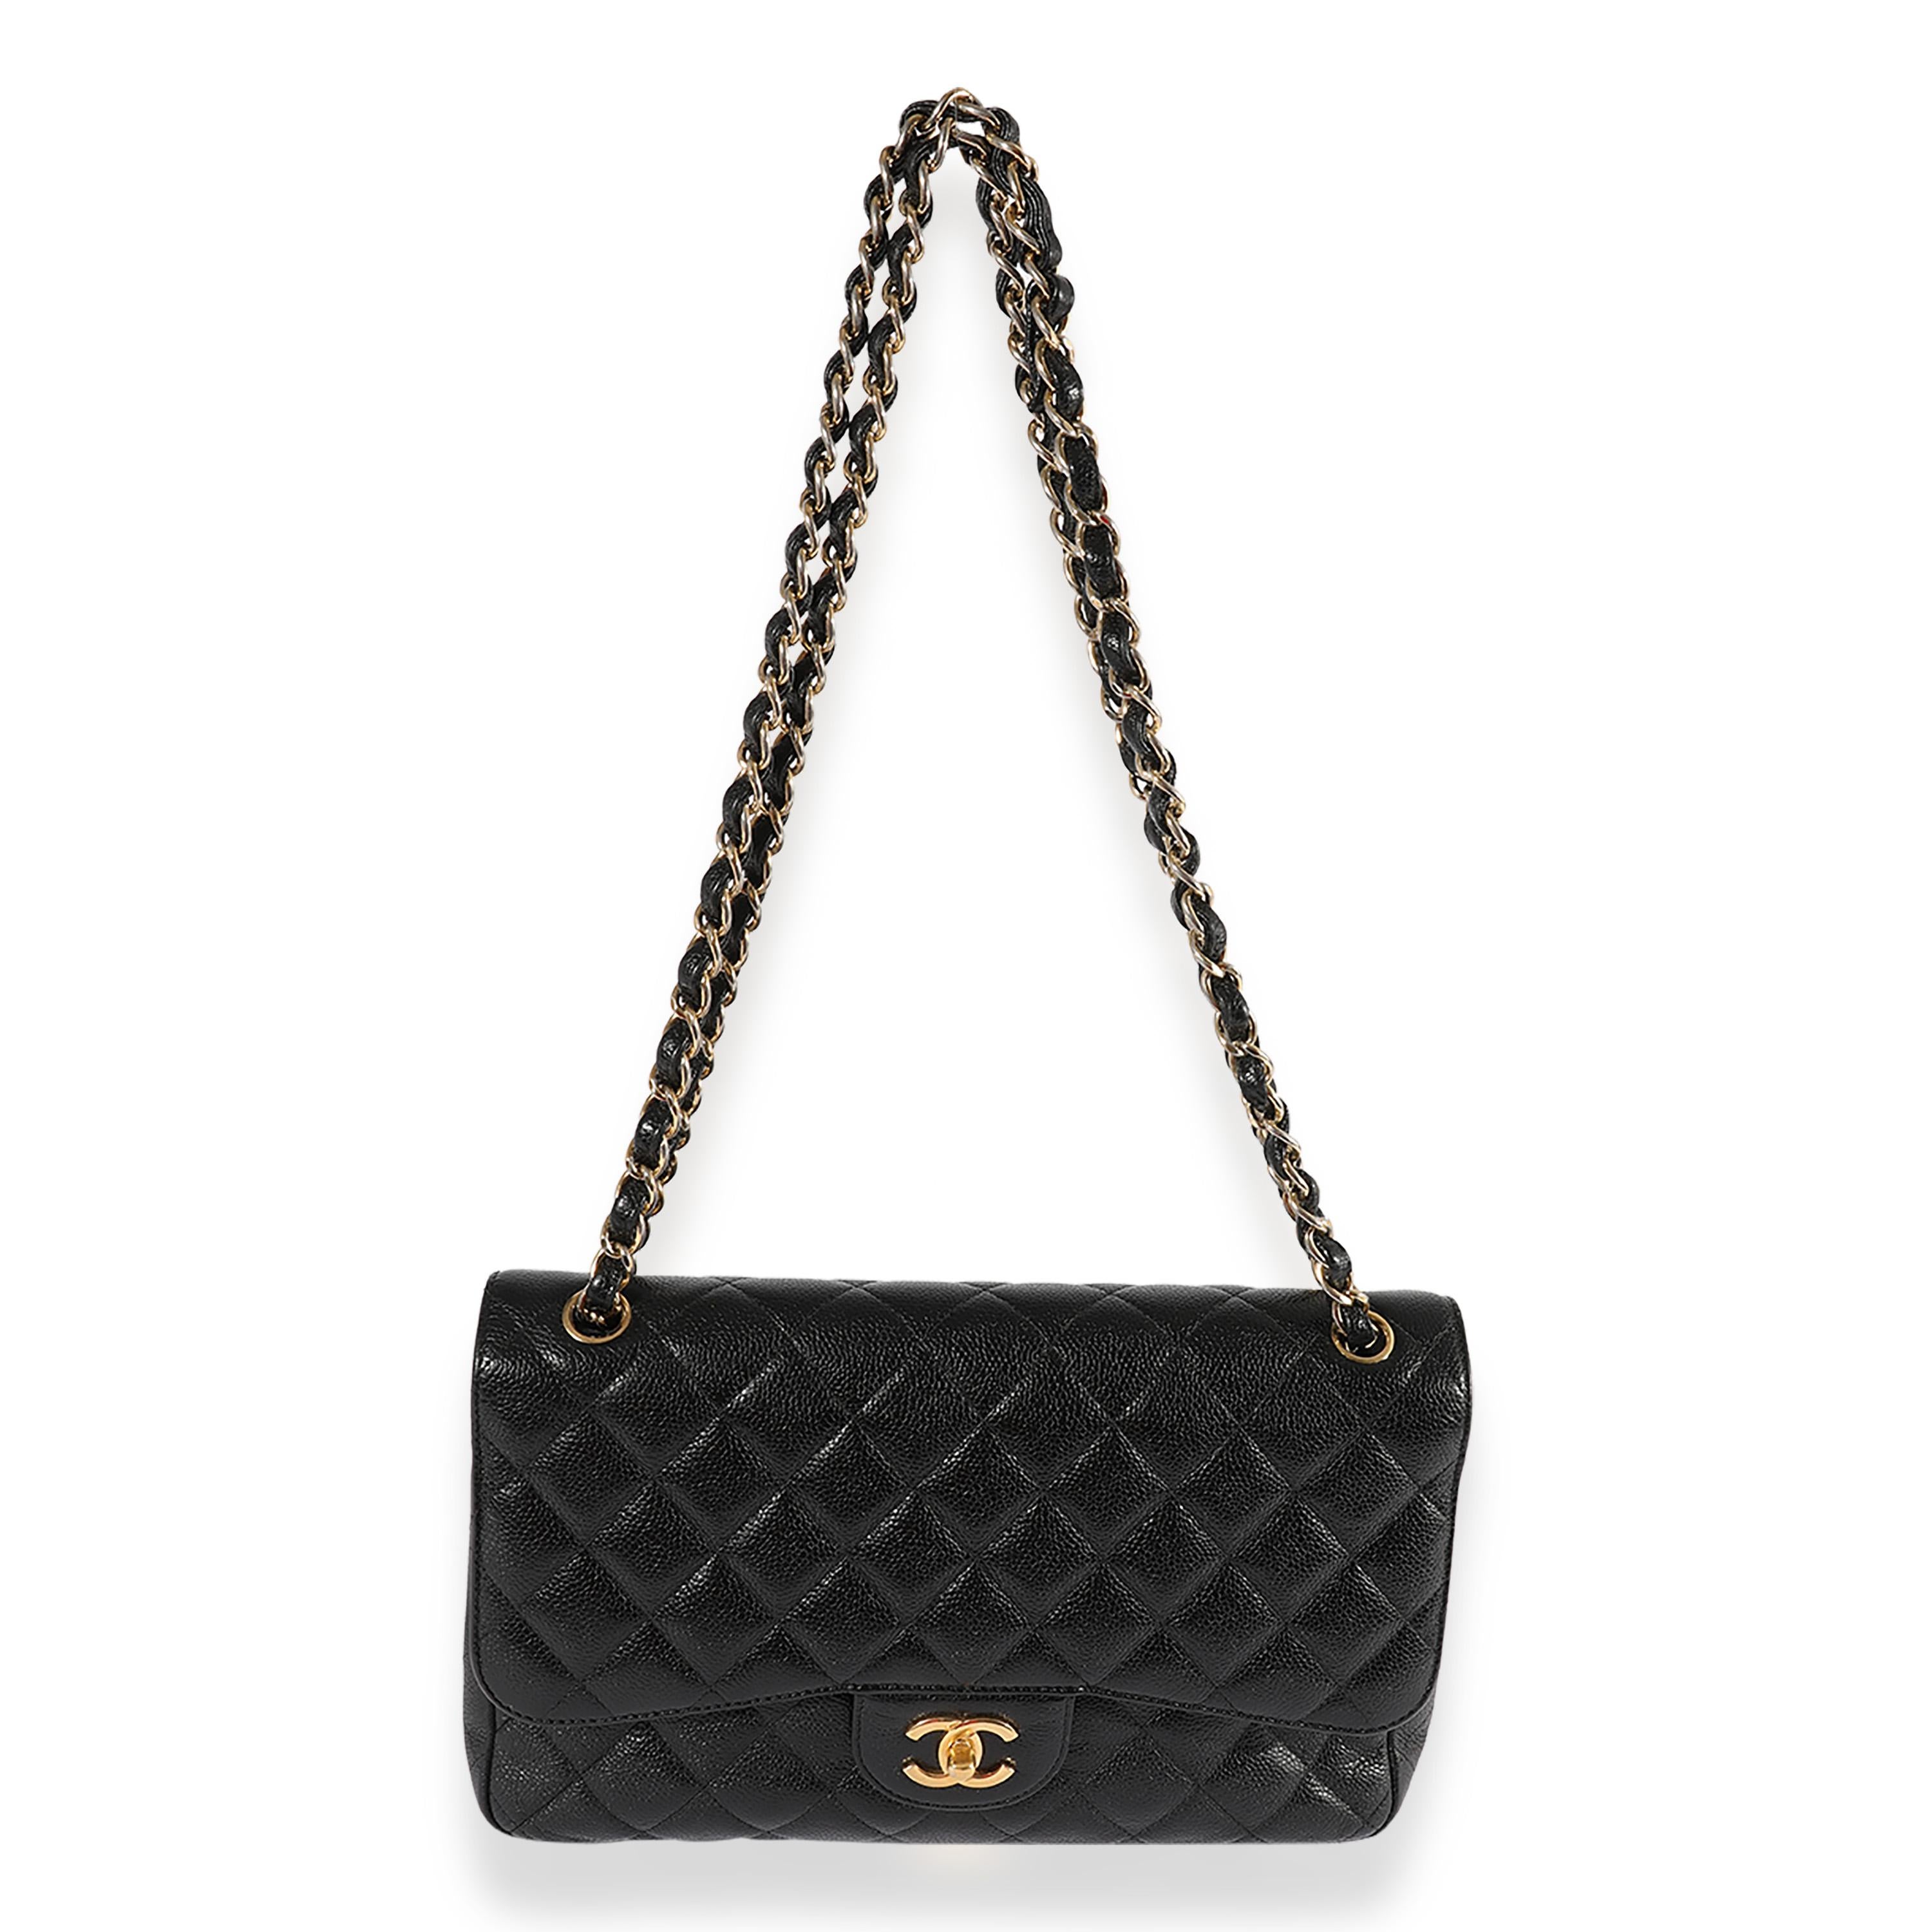 Listing Title: Chanel Black Quilted Caviar Jumbo Classic Double Flap Bag
SKU: 120154
MSRP: 9500.00
Condition: Pre-owned 
Handbag Condition: Very Good
Condition Comments: Wear to corners. Tarnishing to chain. Scratches on hardware. Interior